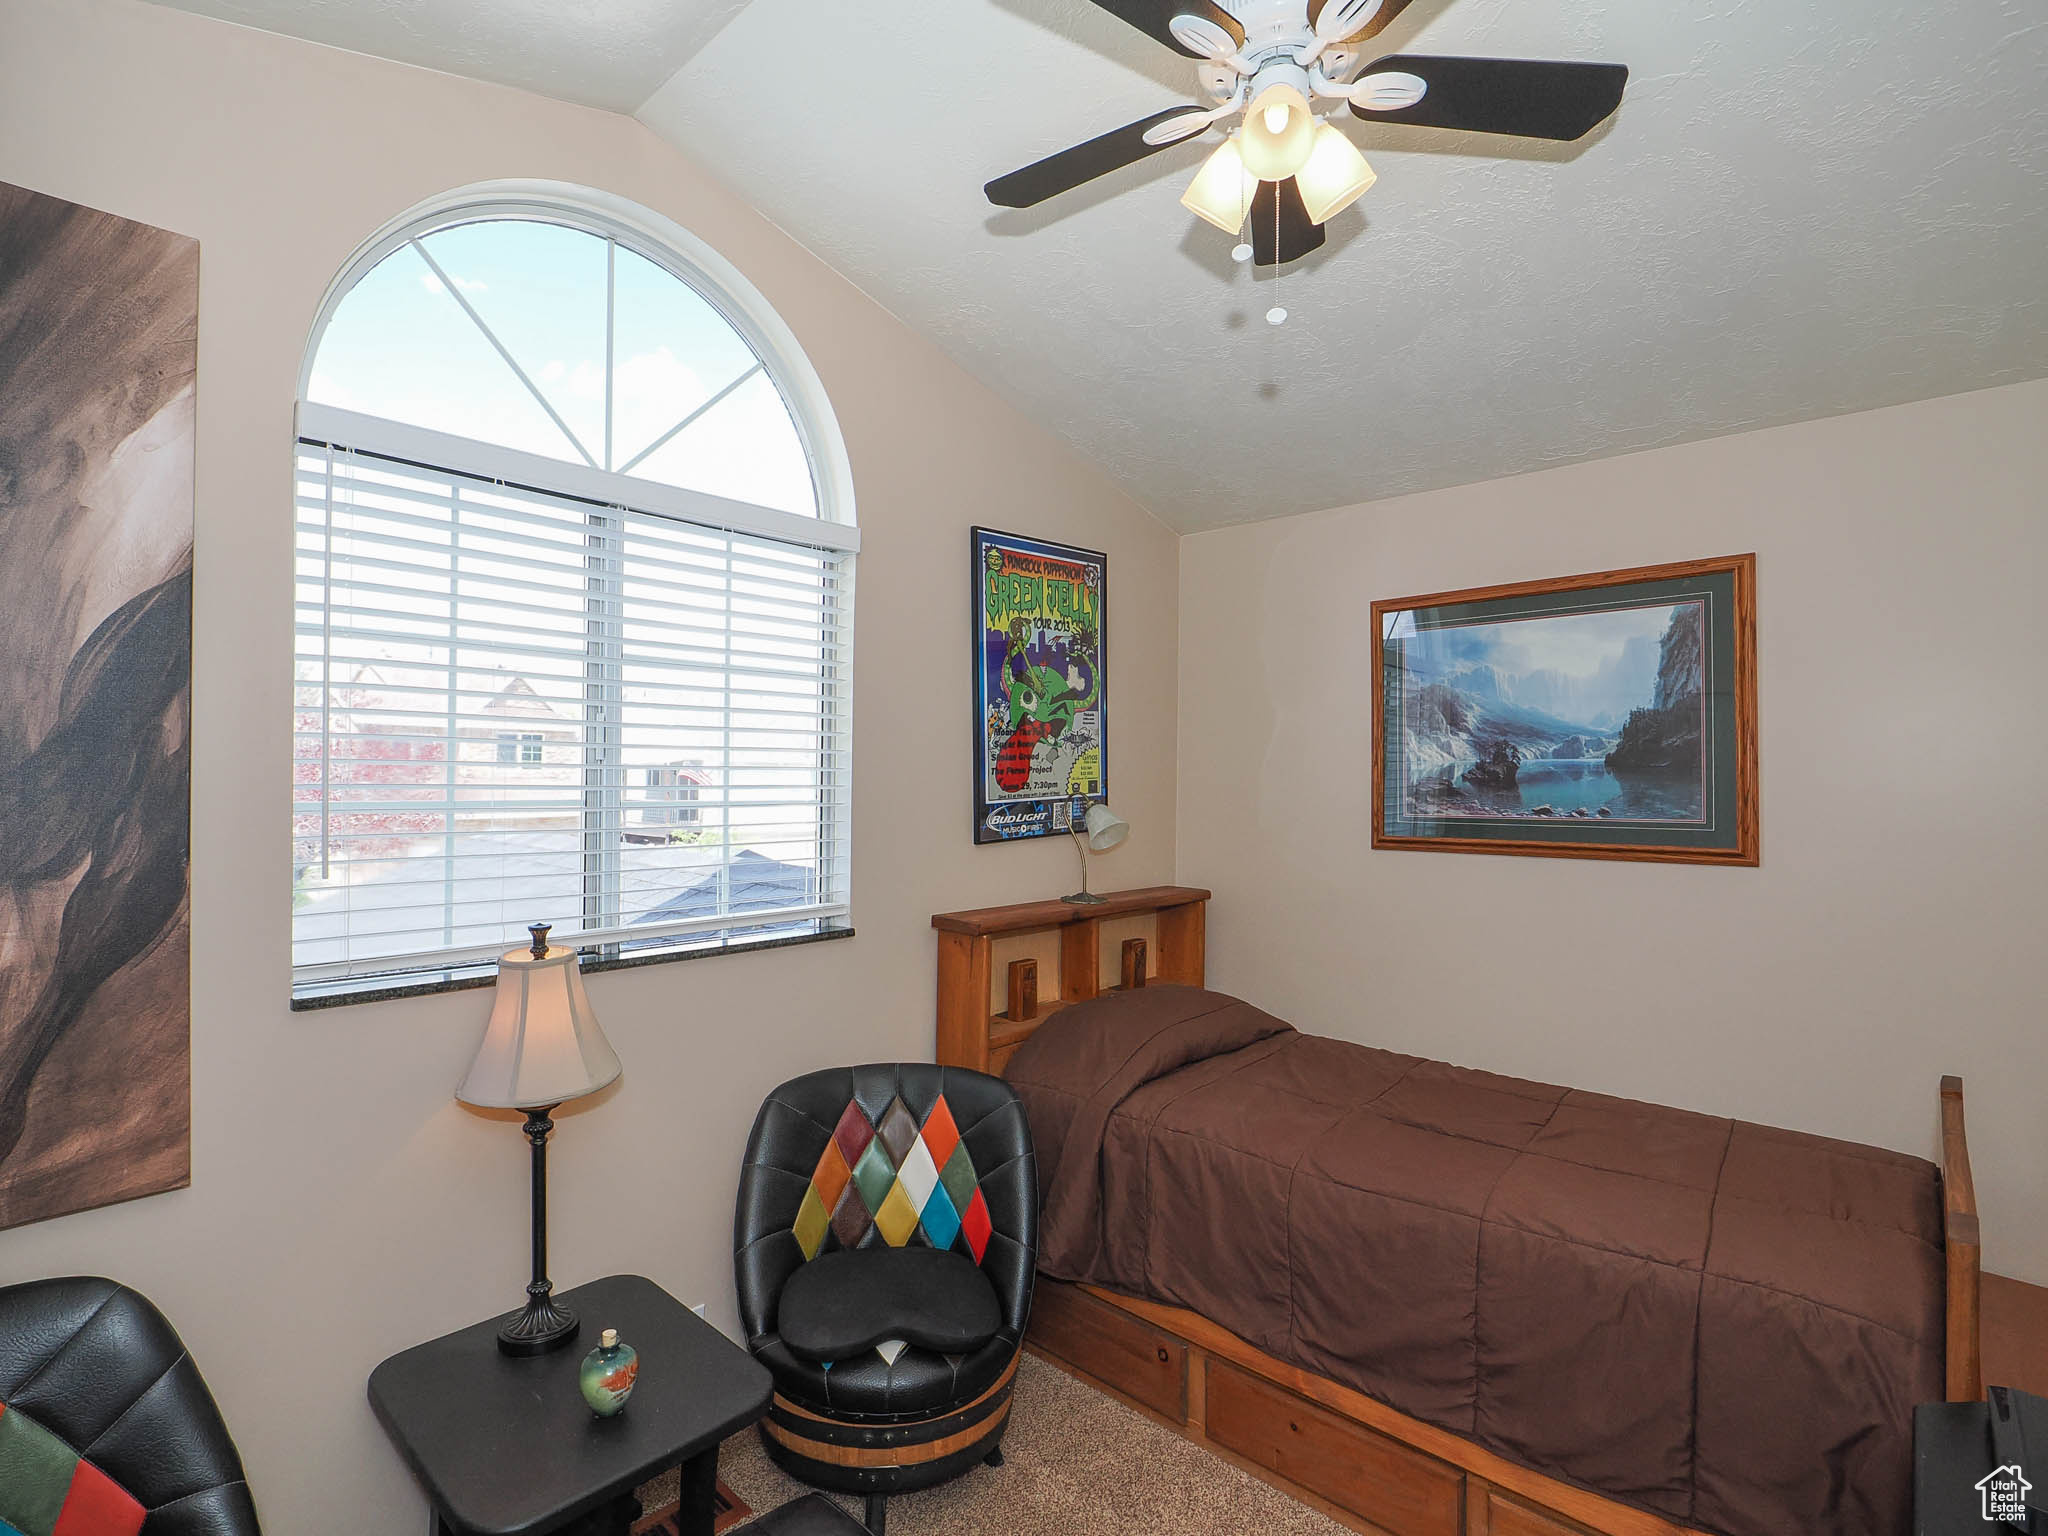 Bedroom with carpet flooring, ceiling fan, and lofted ceiling